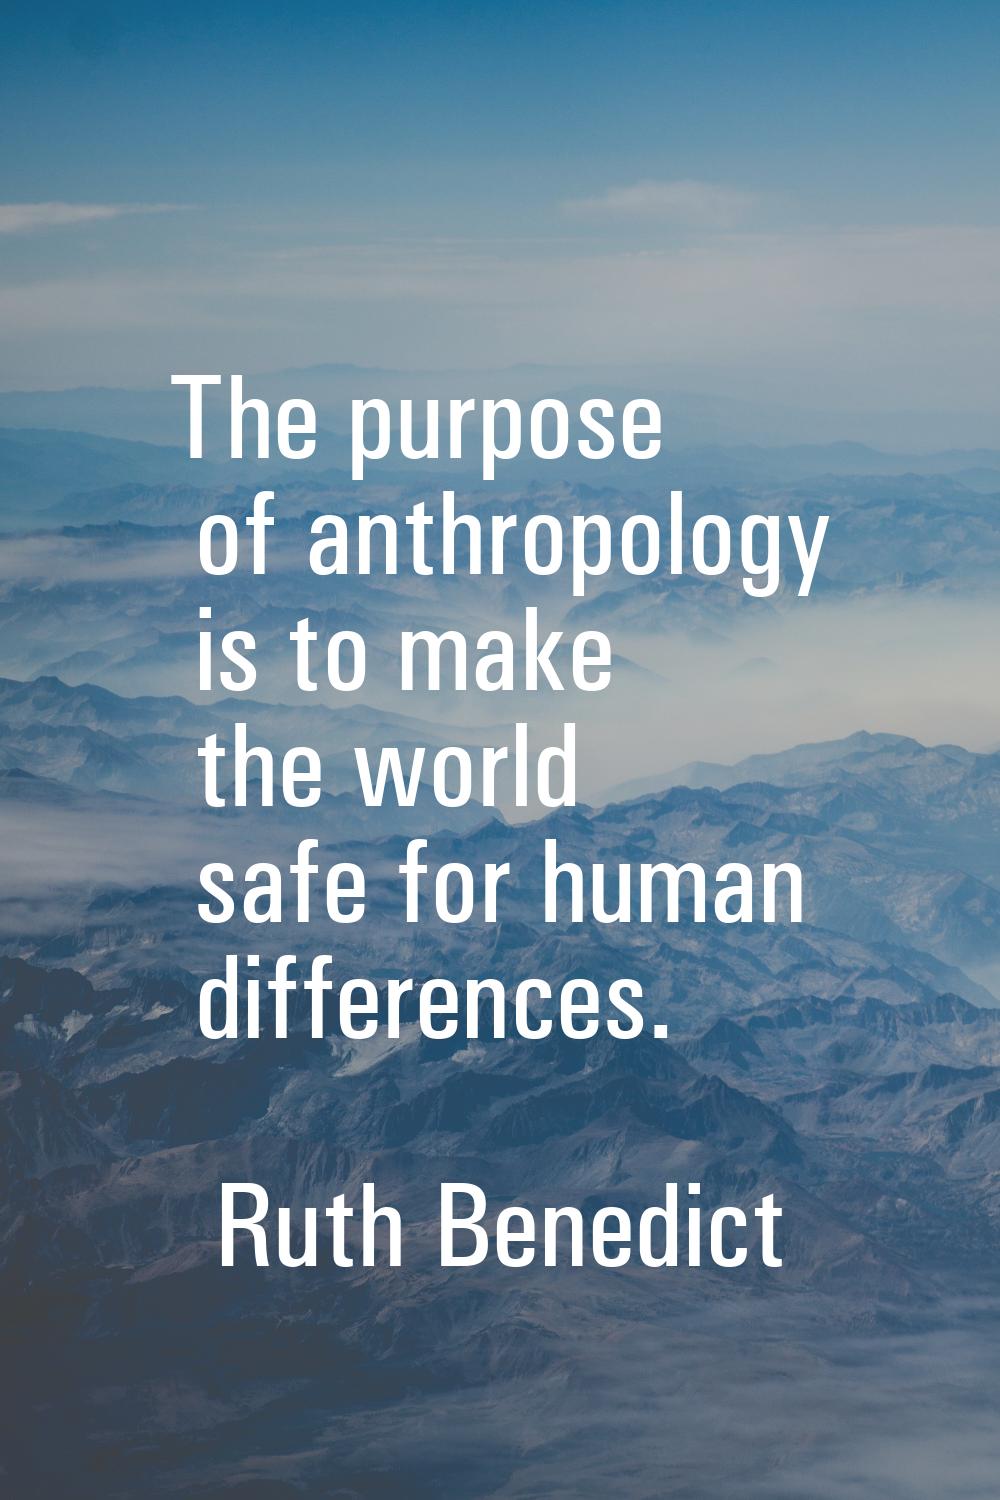 The purpose of anthropology is to make the world safe for human differences.